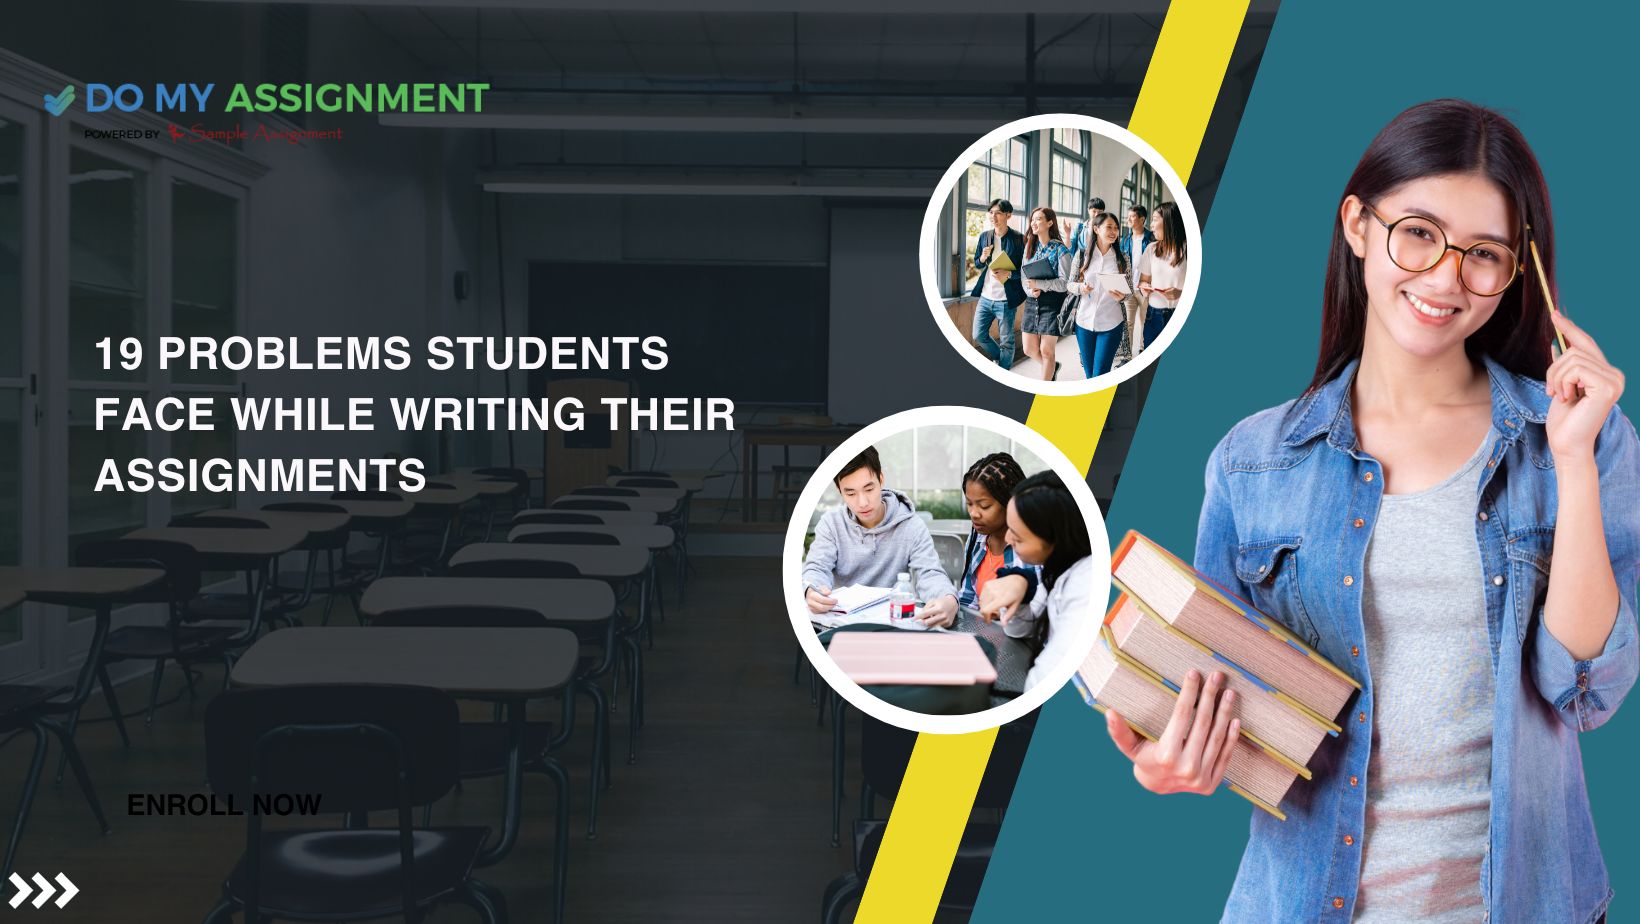 Student Assignment Woes: 19 Common Writing Challenges